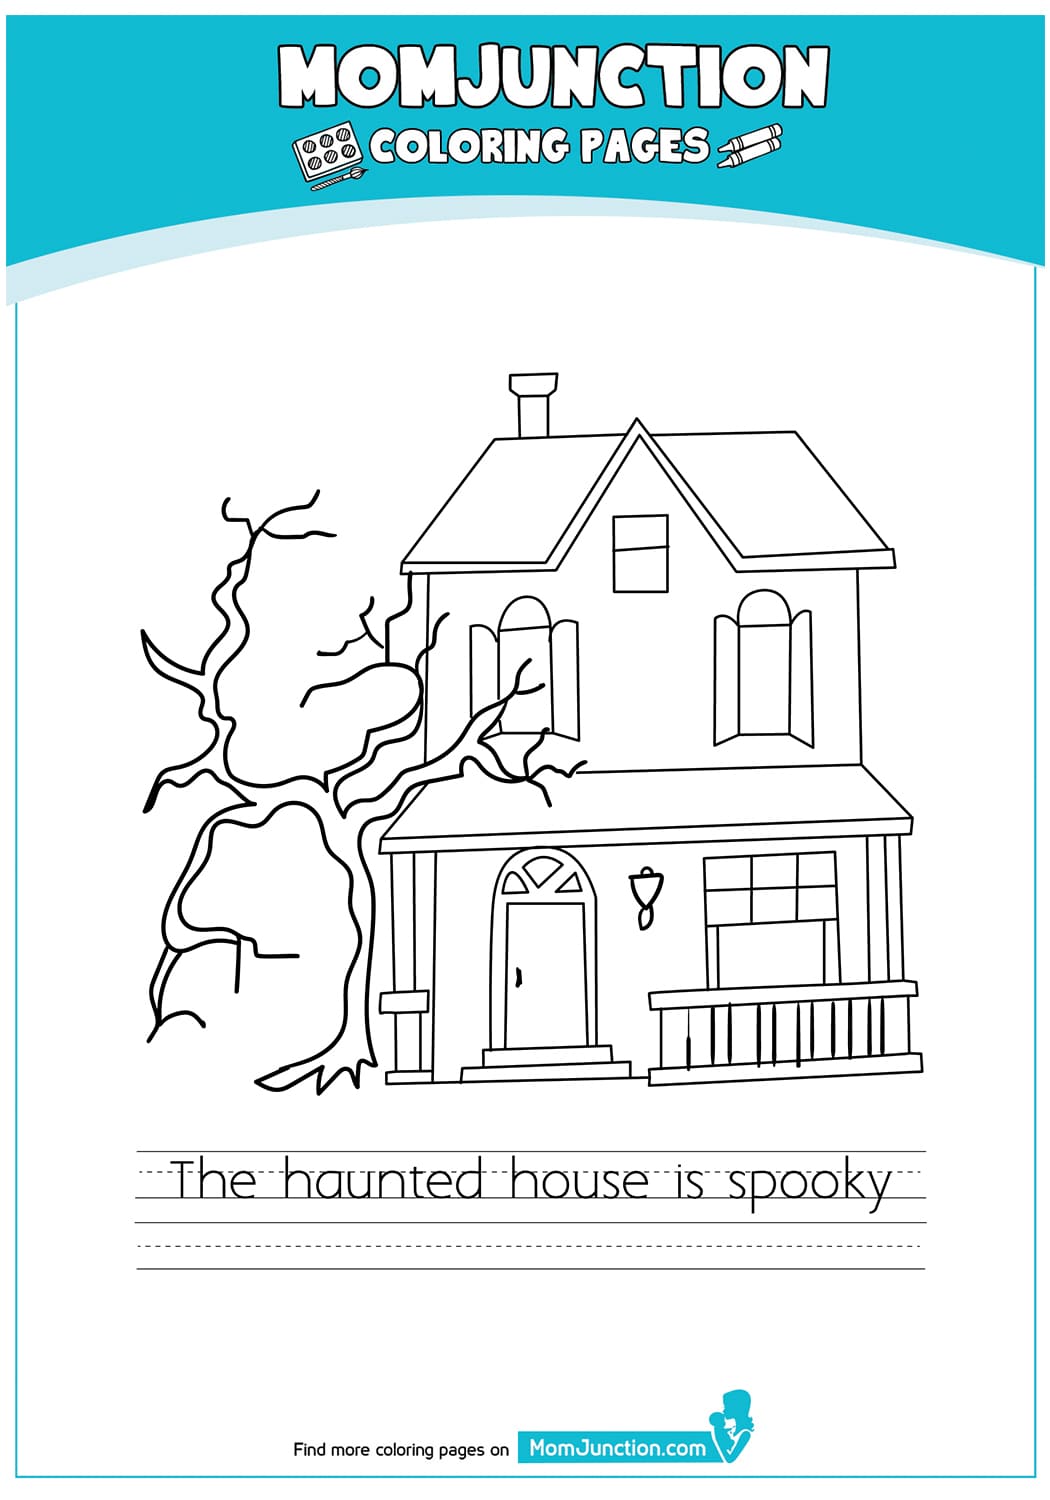 The Haunted House Is Spooky Image